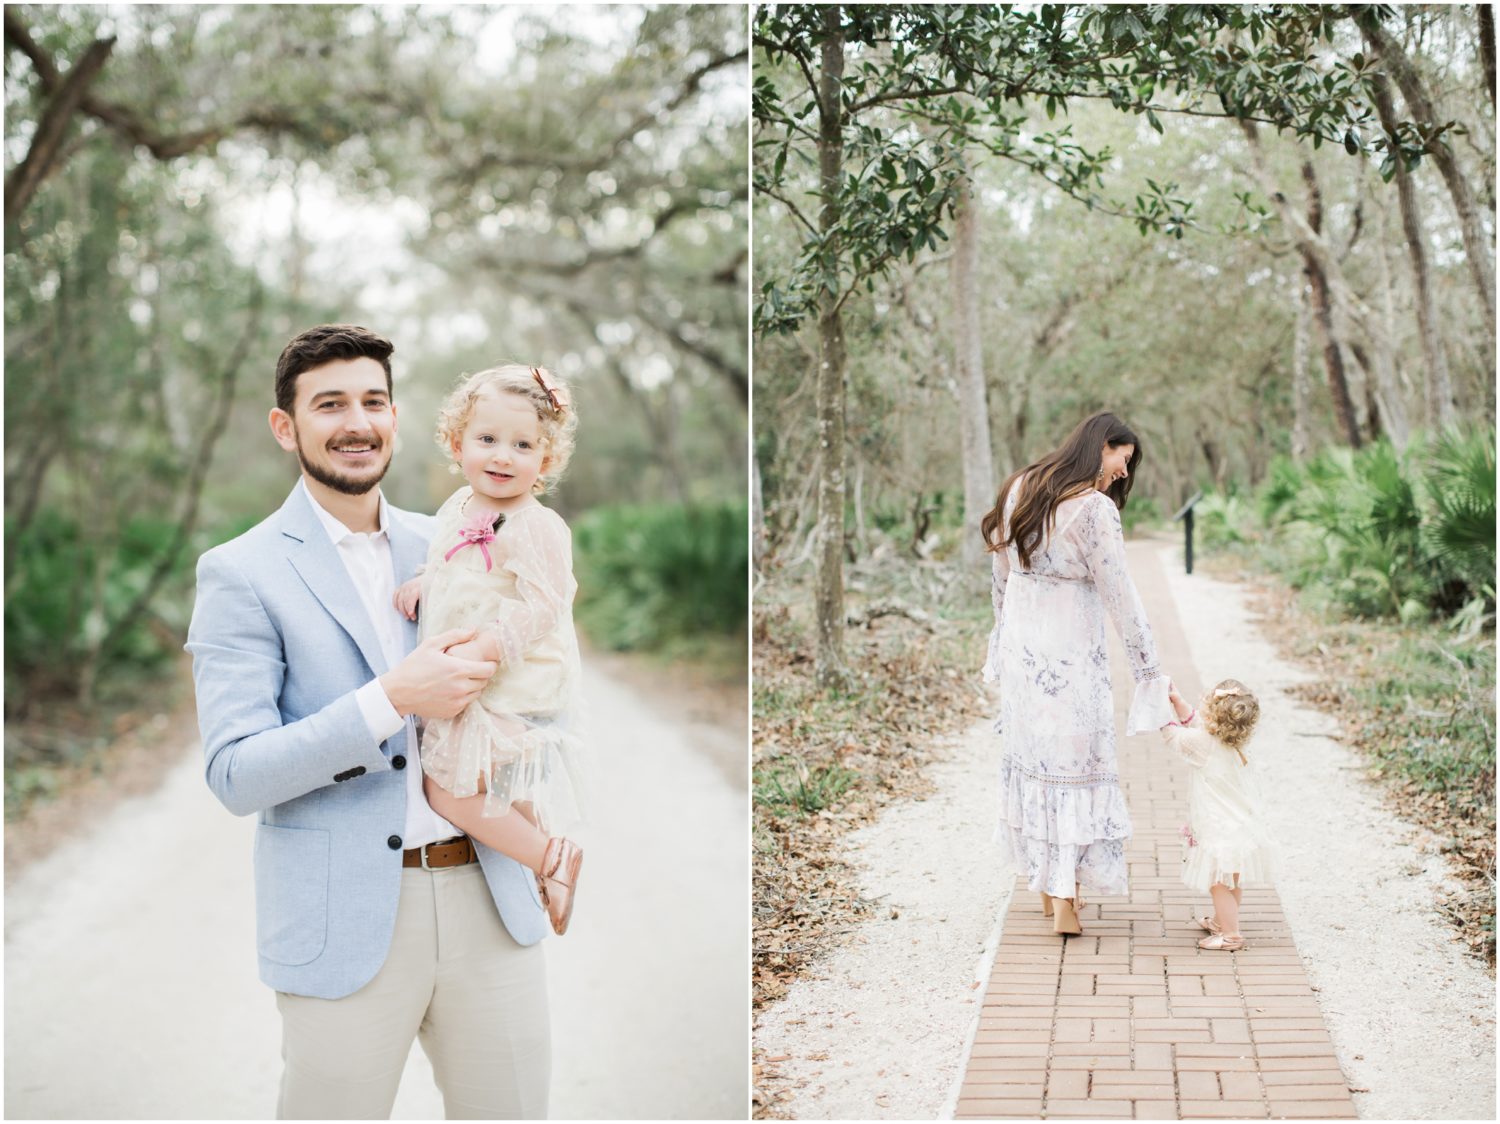 Jacksonville Lifestyle Photographers, Brooke Images, Beach Session, Family Session, Maternity Session, The Wynne Family